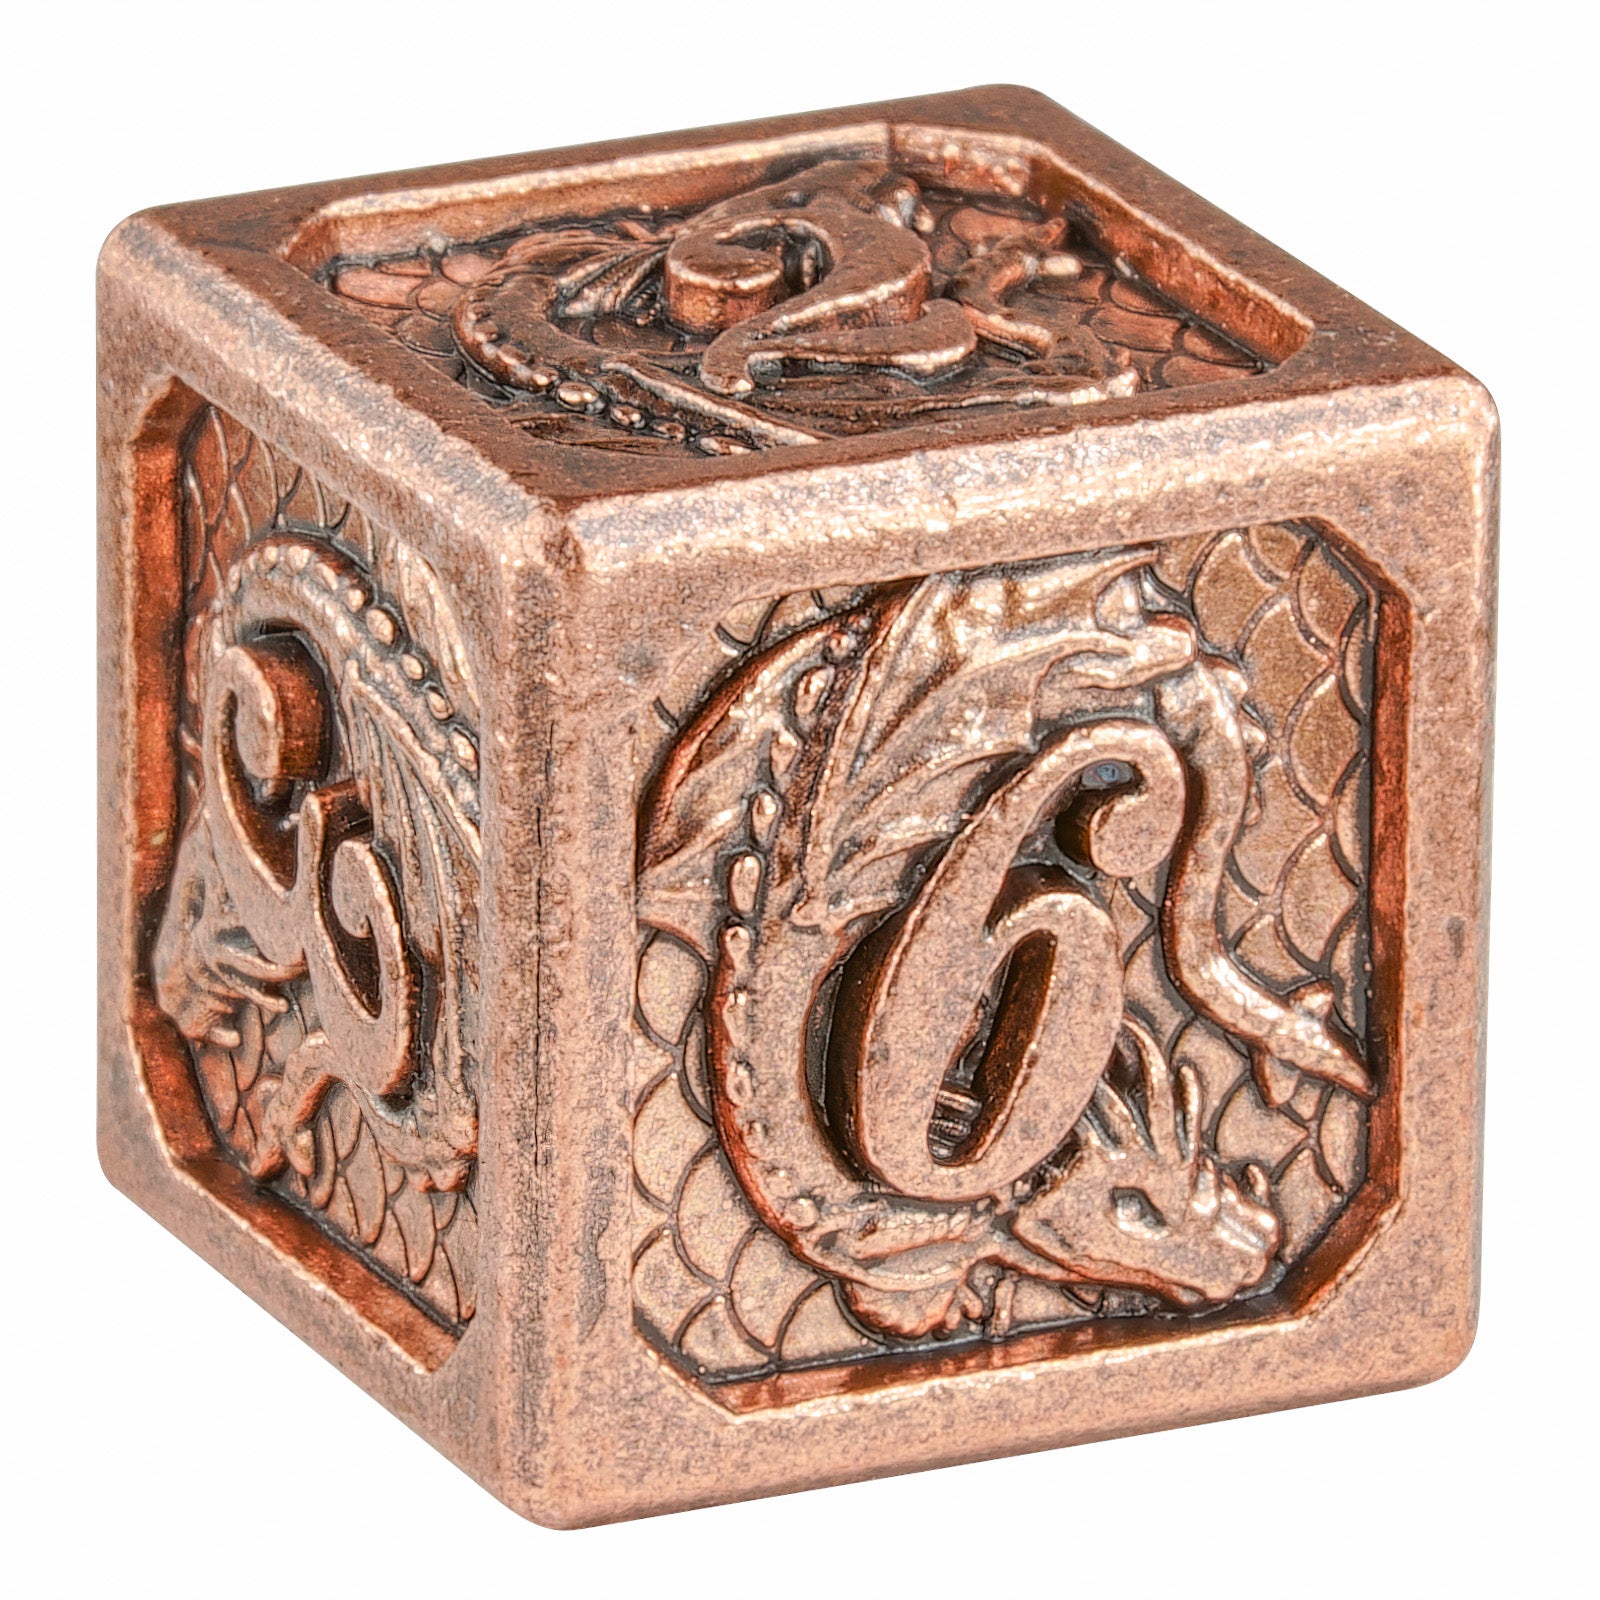 D&D Antique dirty Copper Dragon Dice set for RPG gaming - HYMGHO Dice 